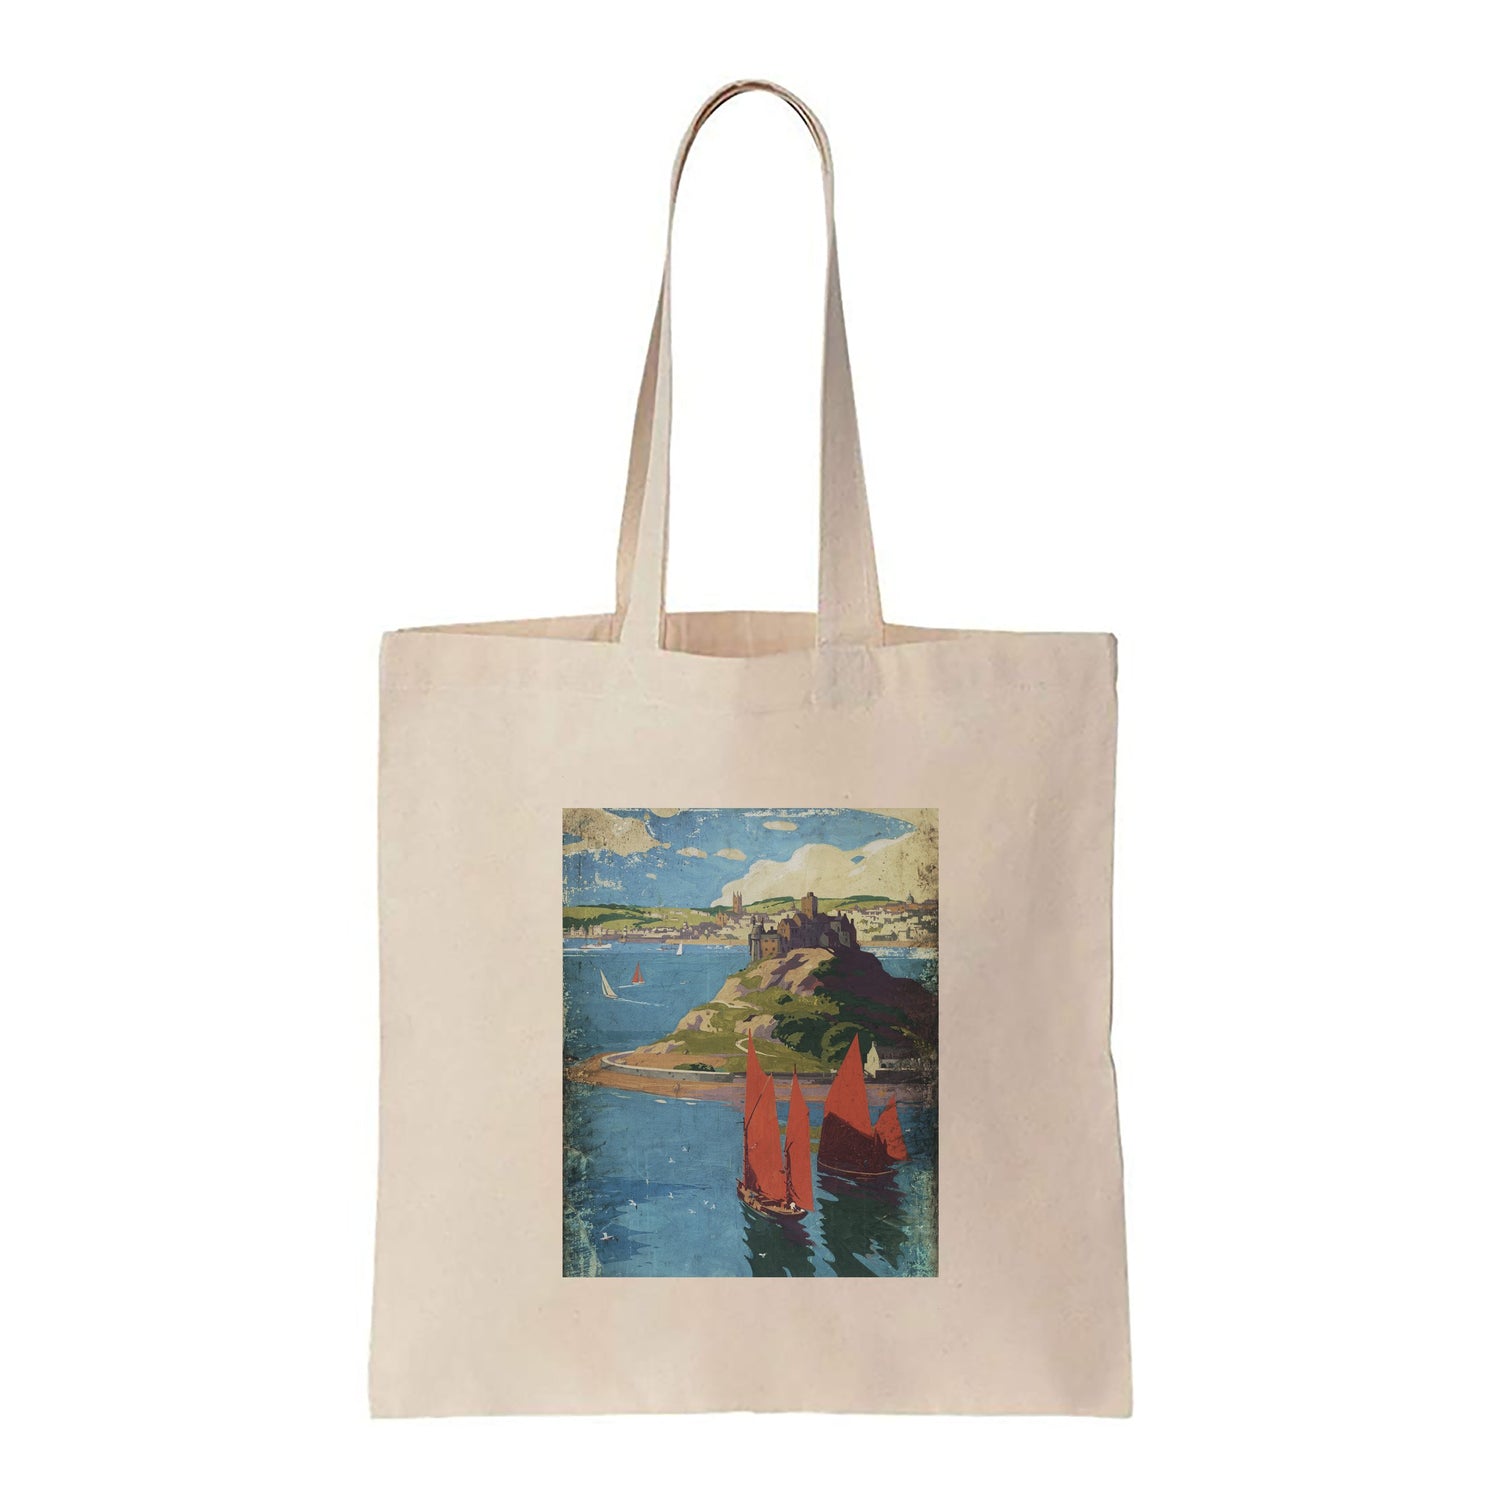 Island and Red Boats - Canvas Tote Bag